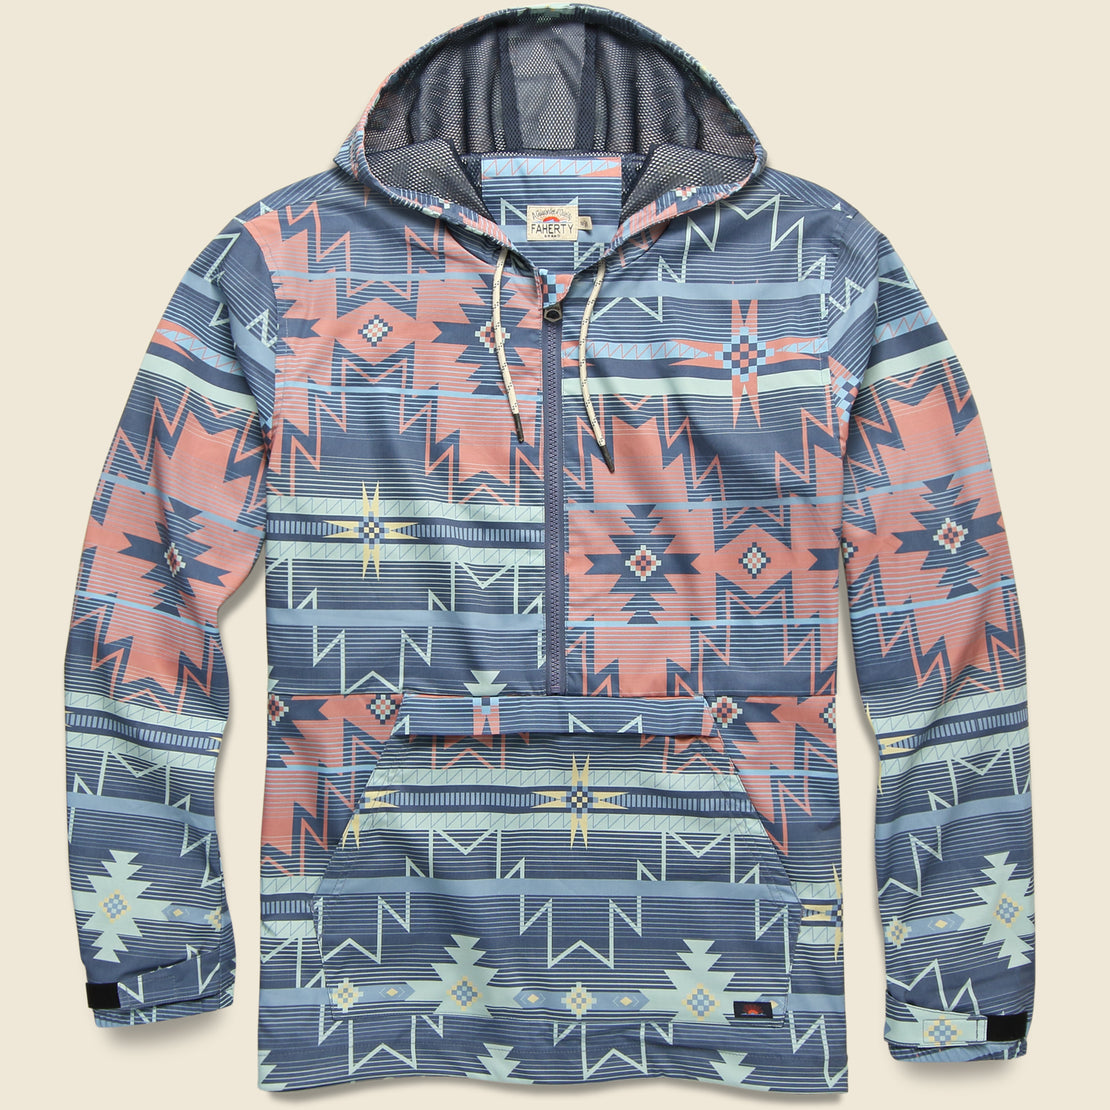 Faherty Red Rocks Anorak - Pacific Morning Star